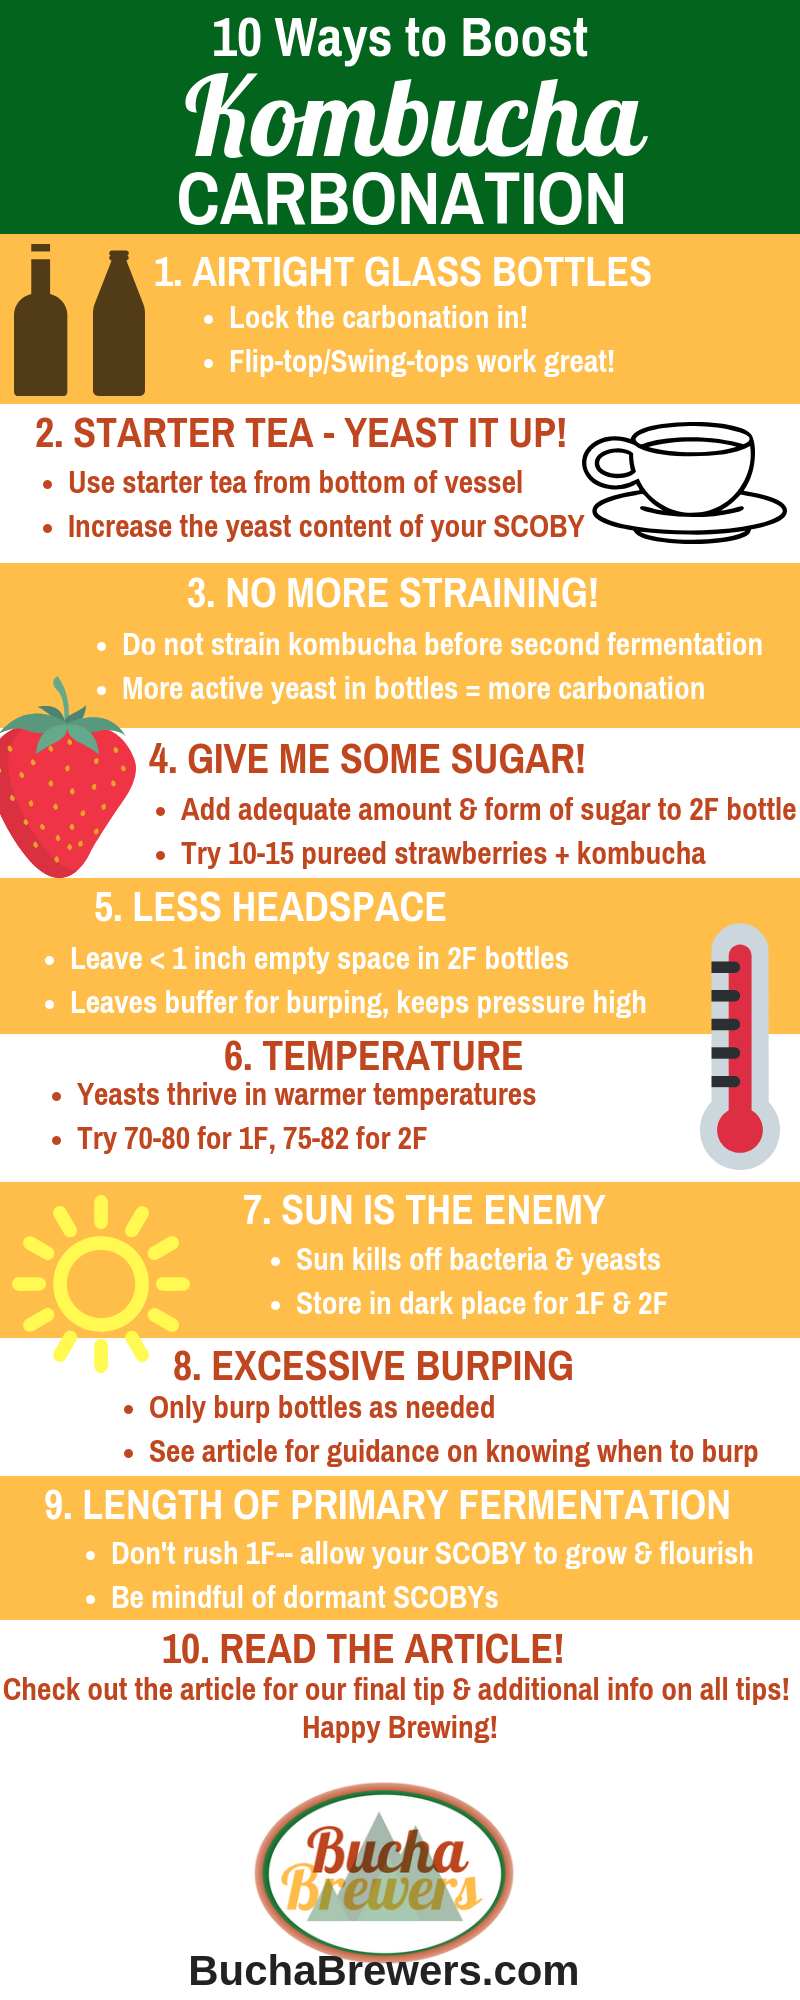 Kombucha Carbonation - 10 Ways to Boost Carbonation Infographic